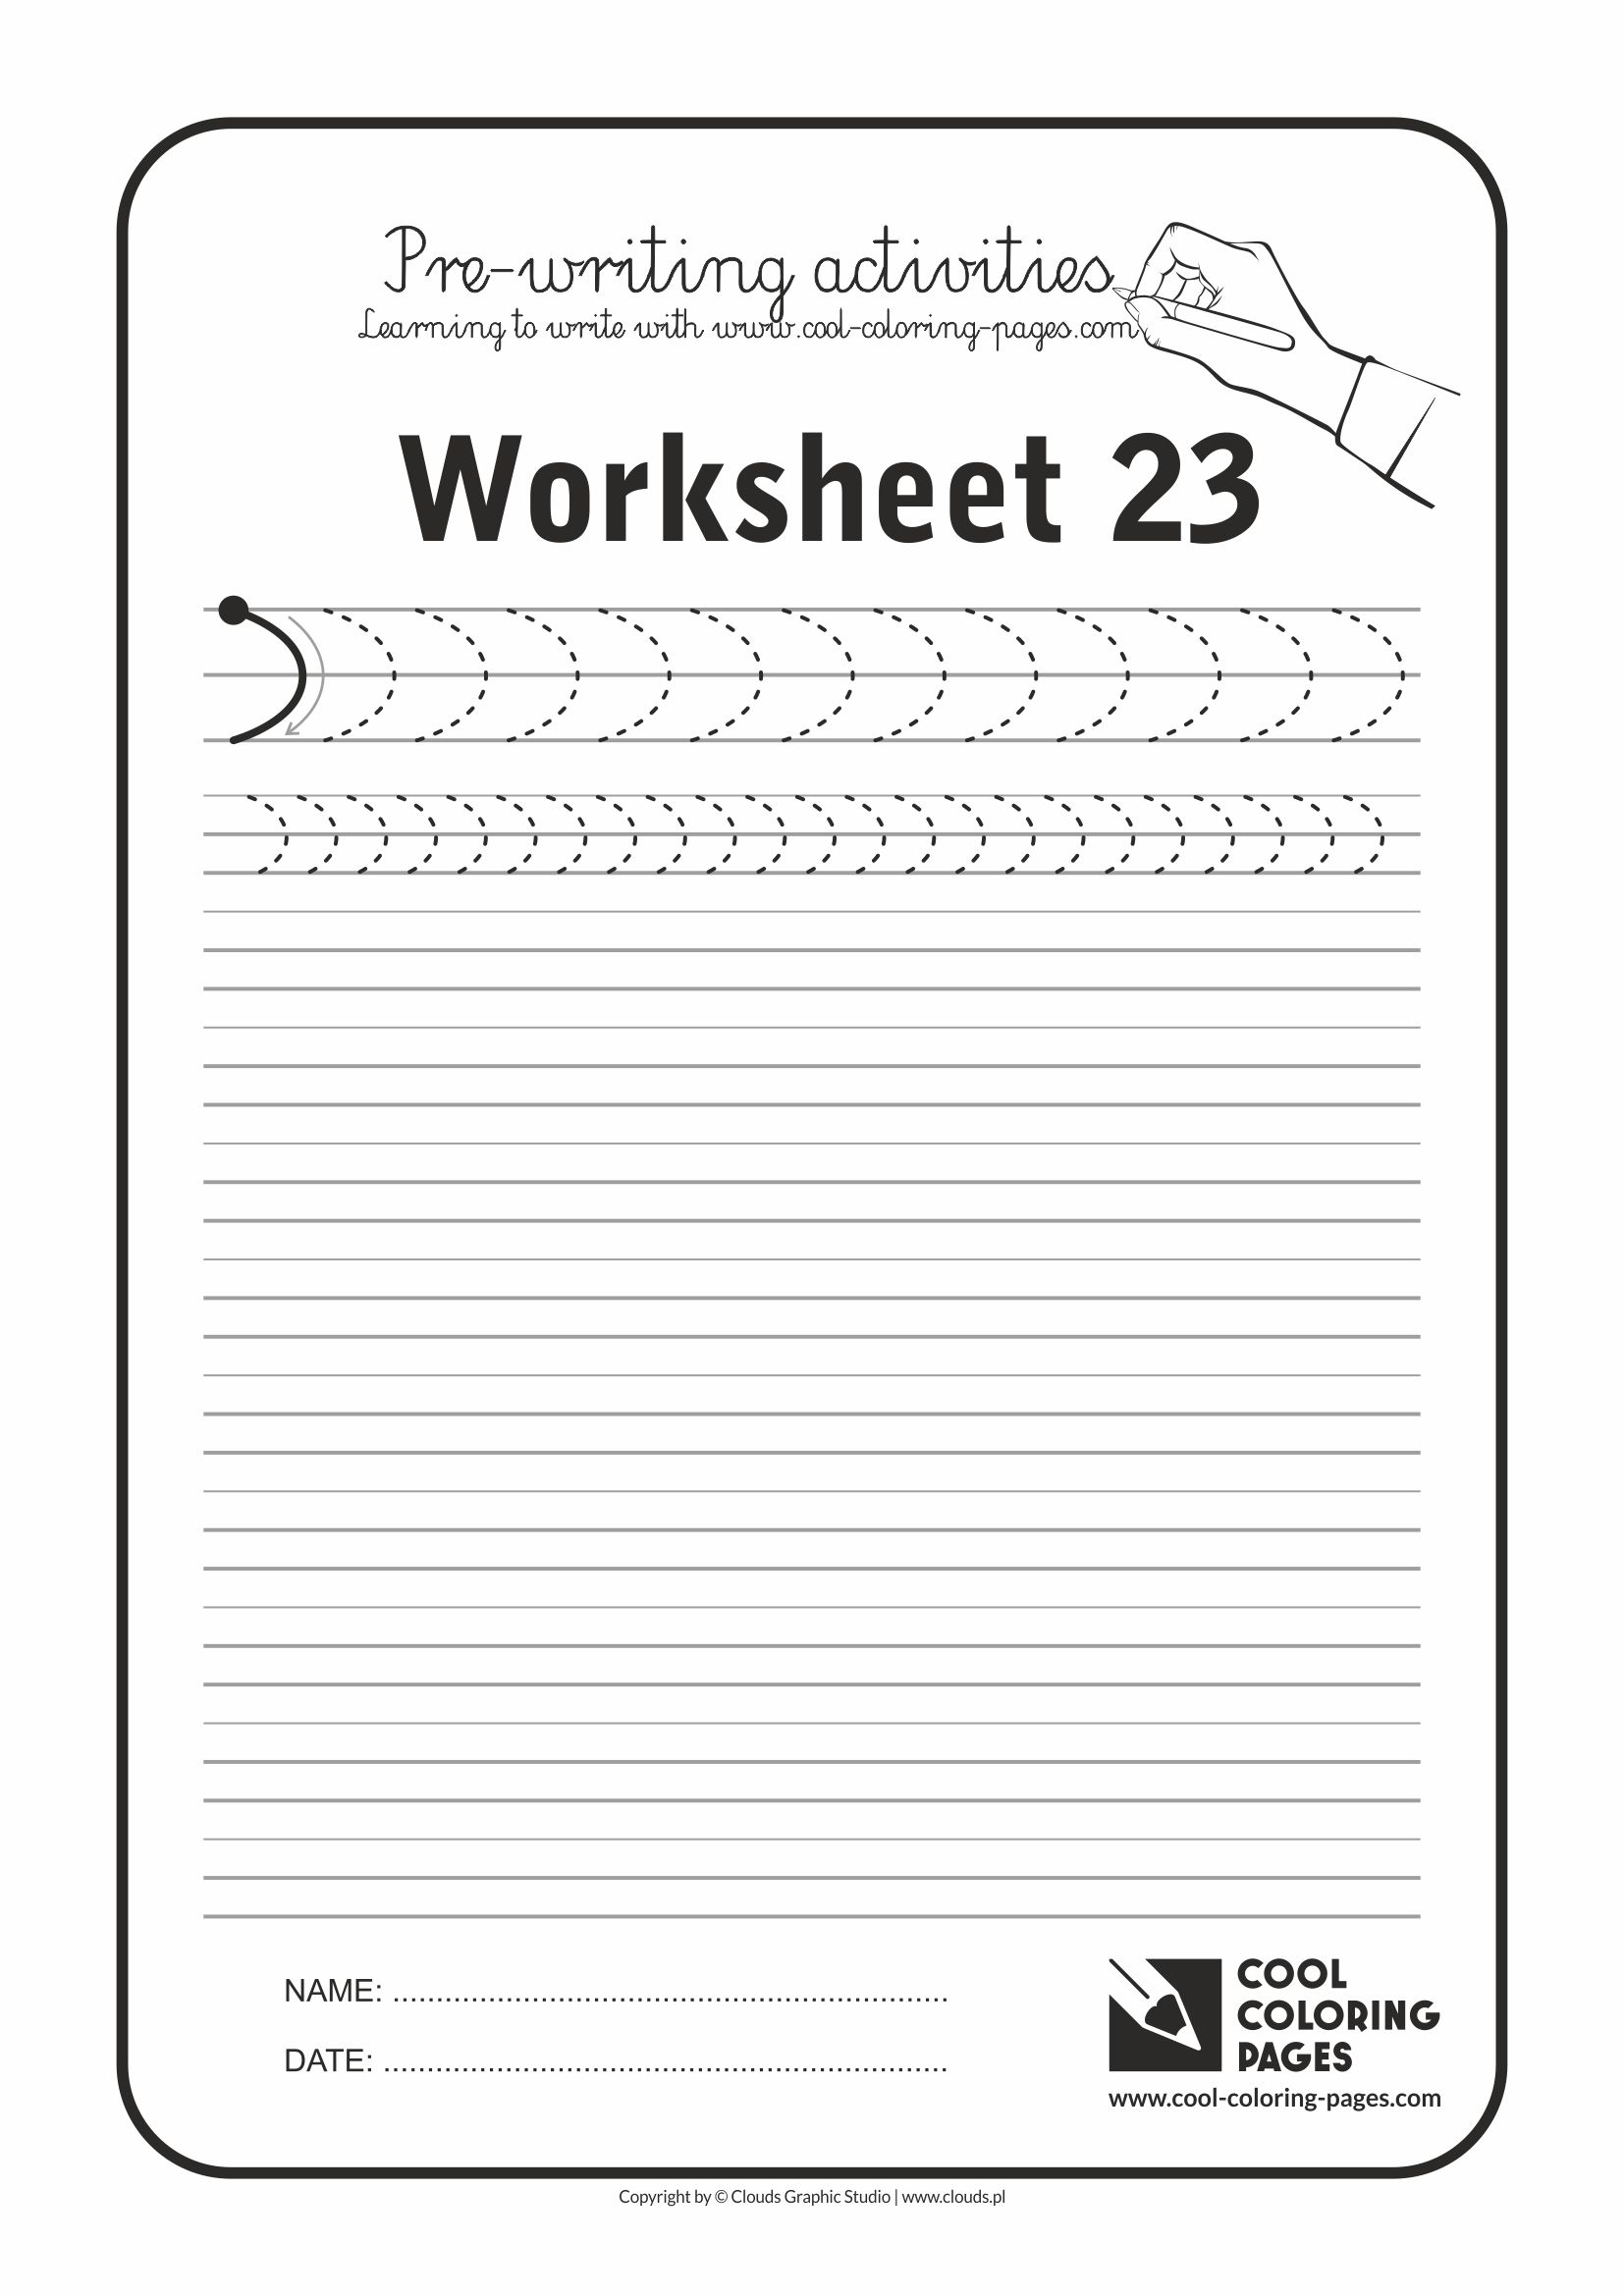 Cool Coloring Pages / Pre-writing activities / Worksheet no.23